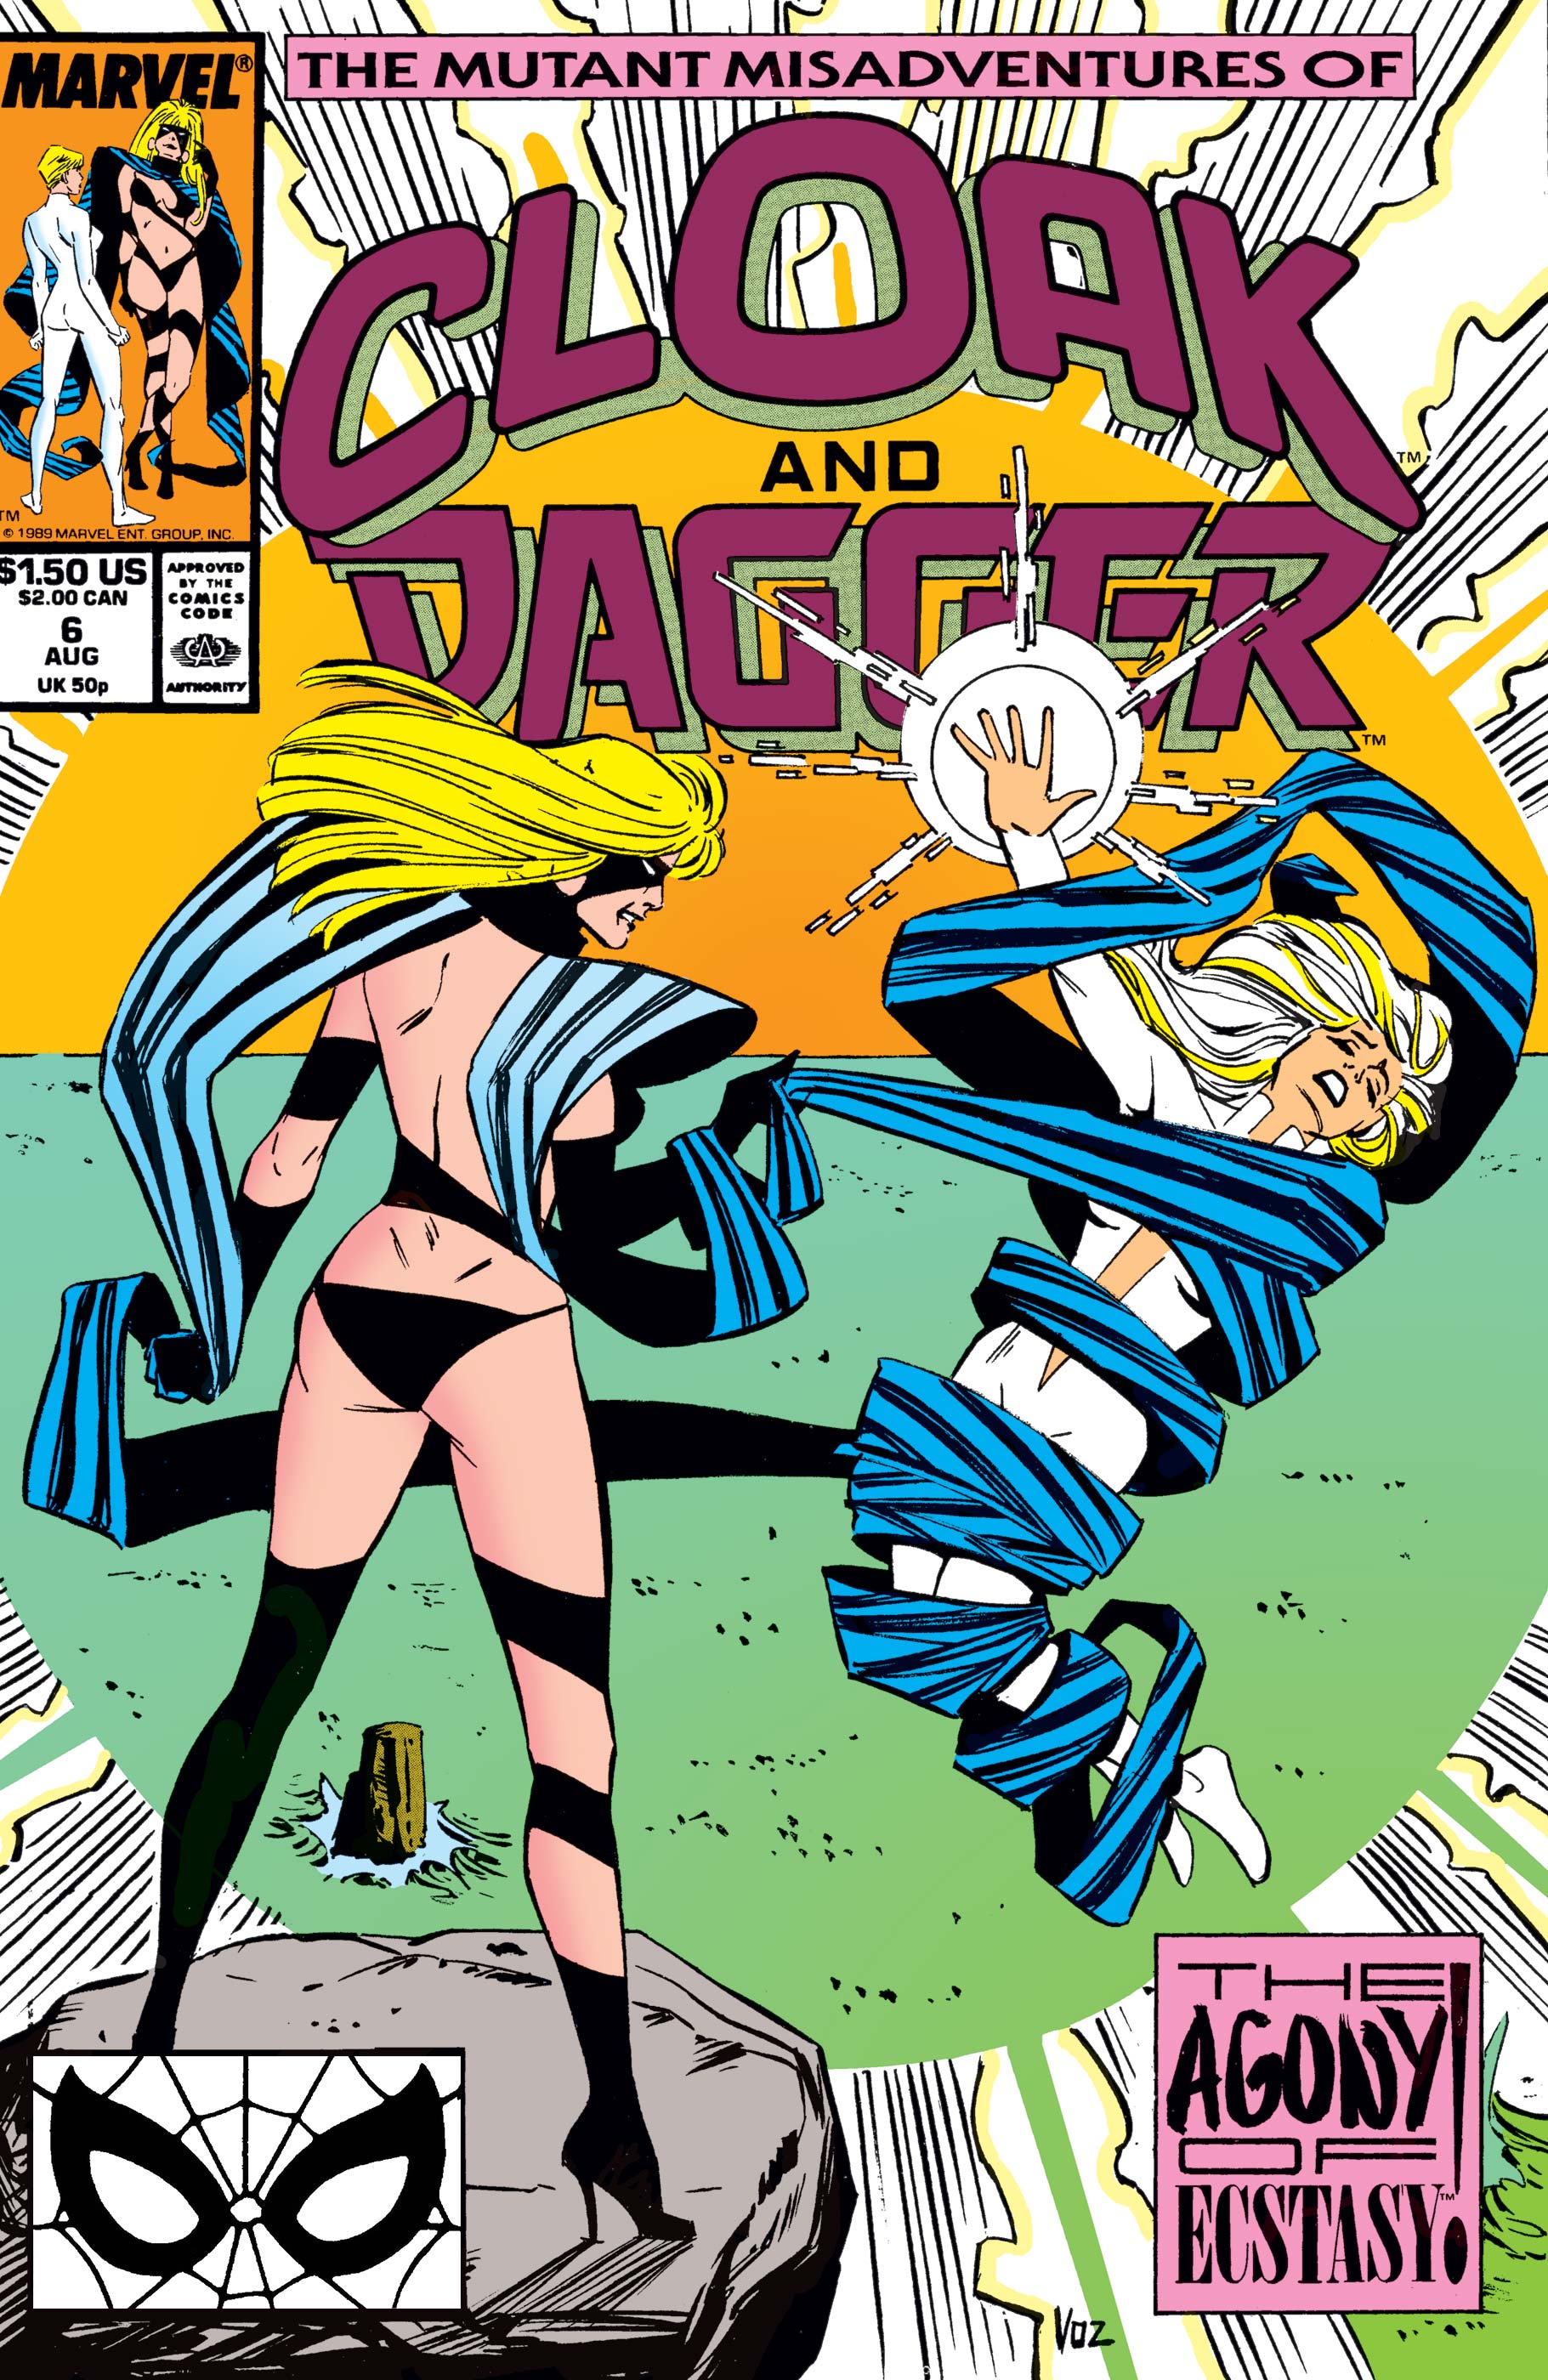 The Mutant Misadventures of Cloak and Dagger (1988) #6